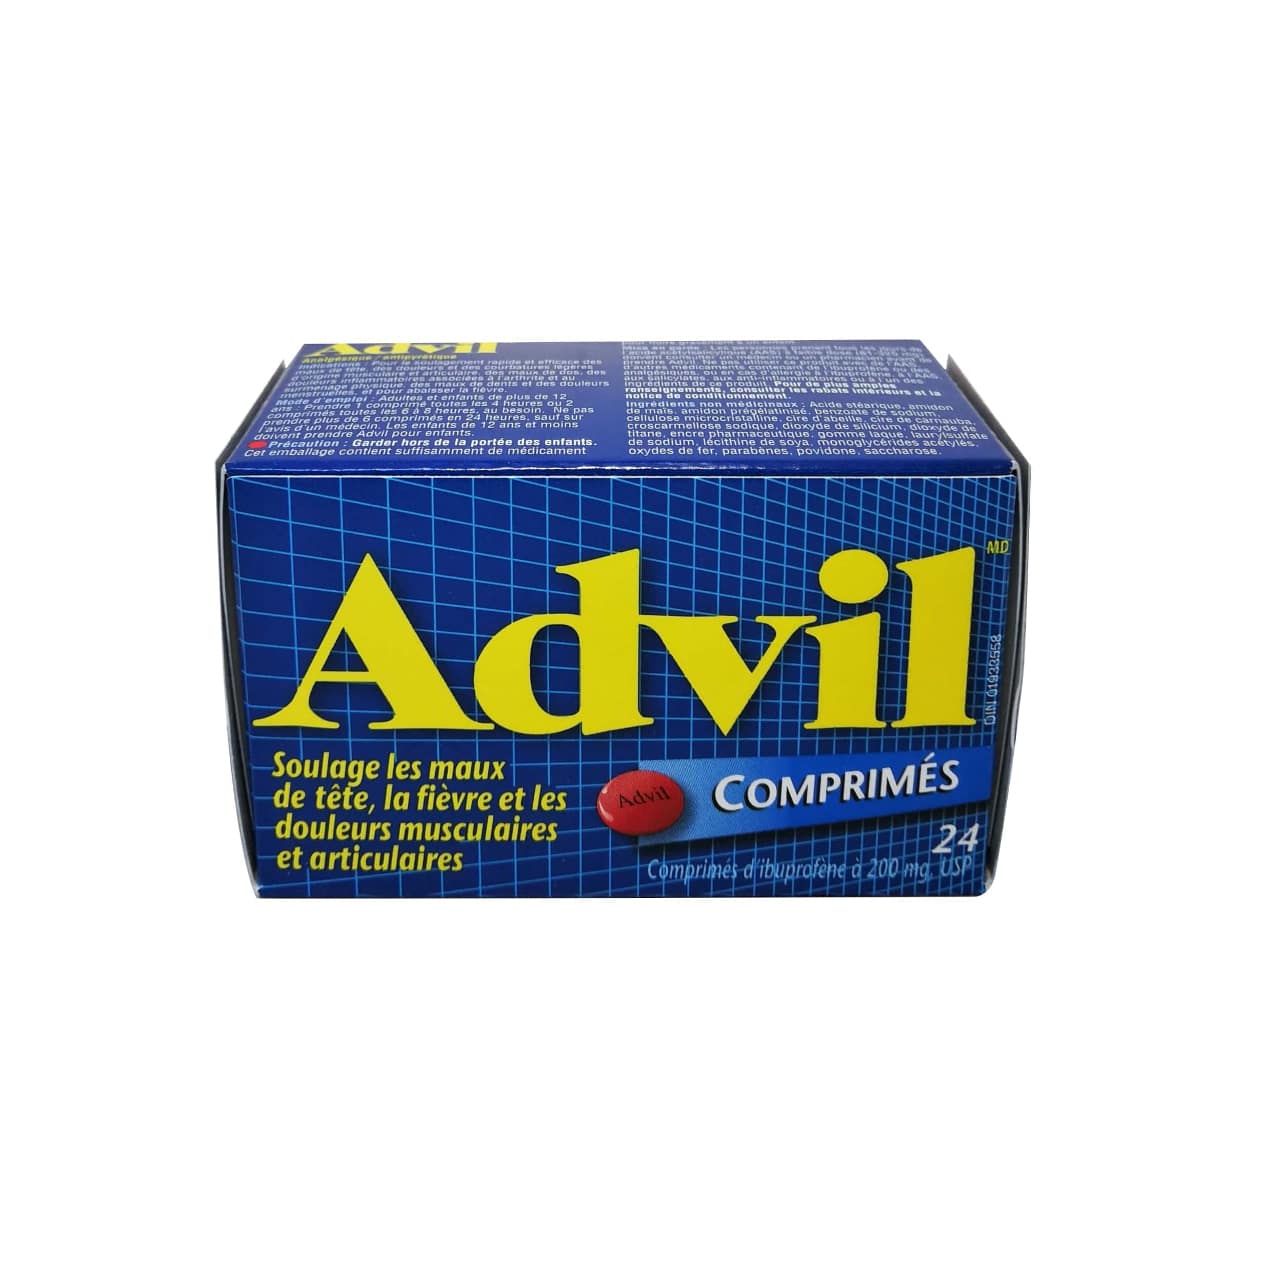 French product label for Advil Ibuprofen 200mg Tablets 24 pack